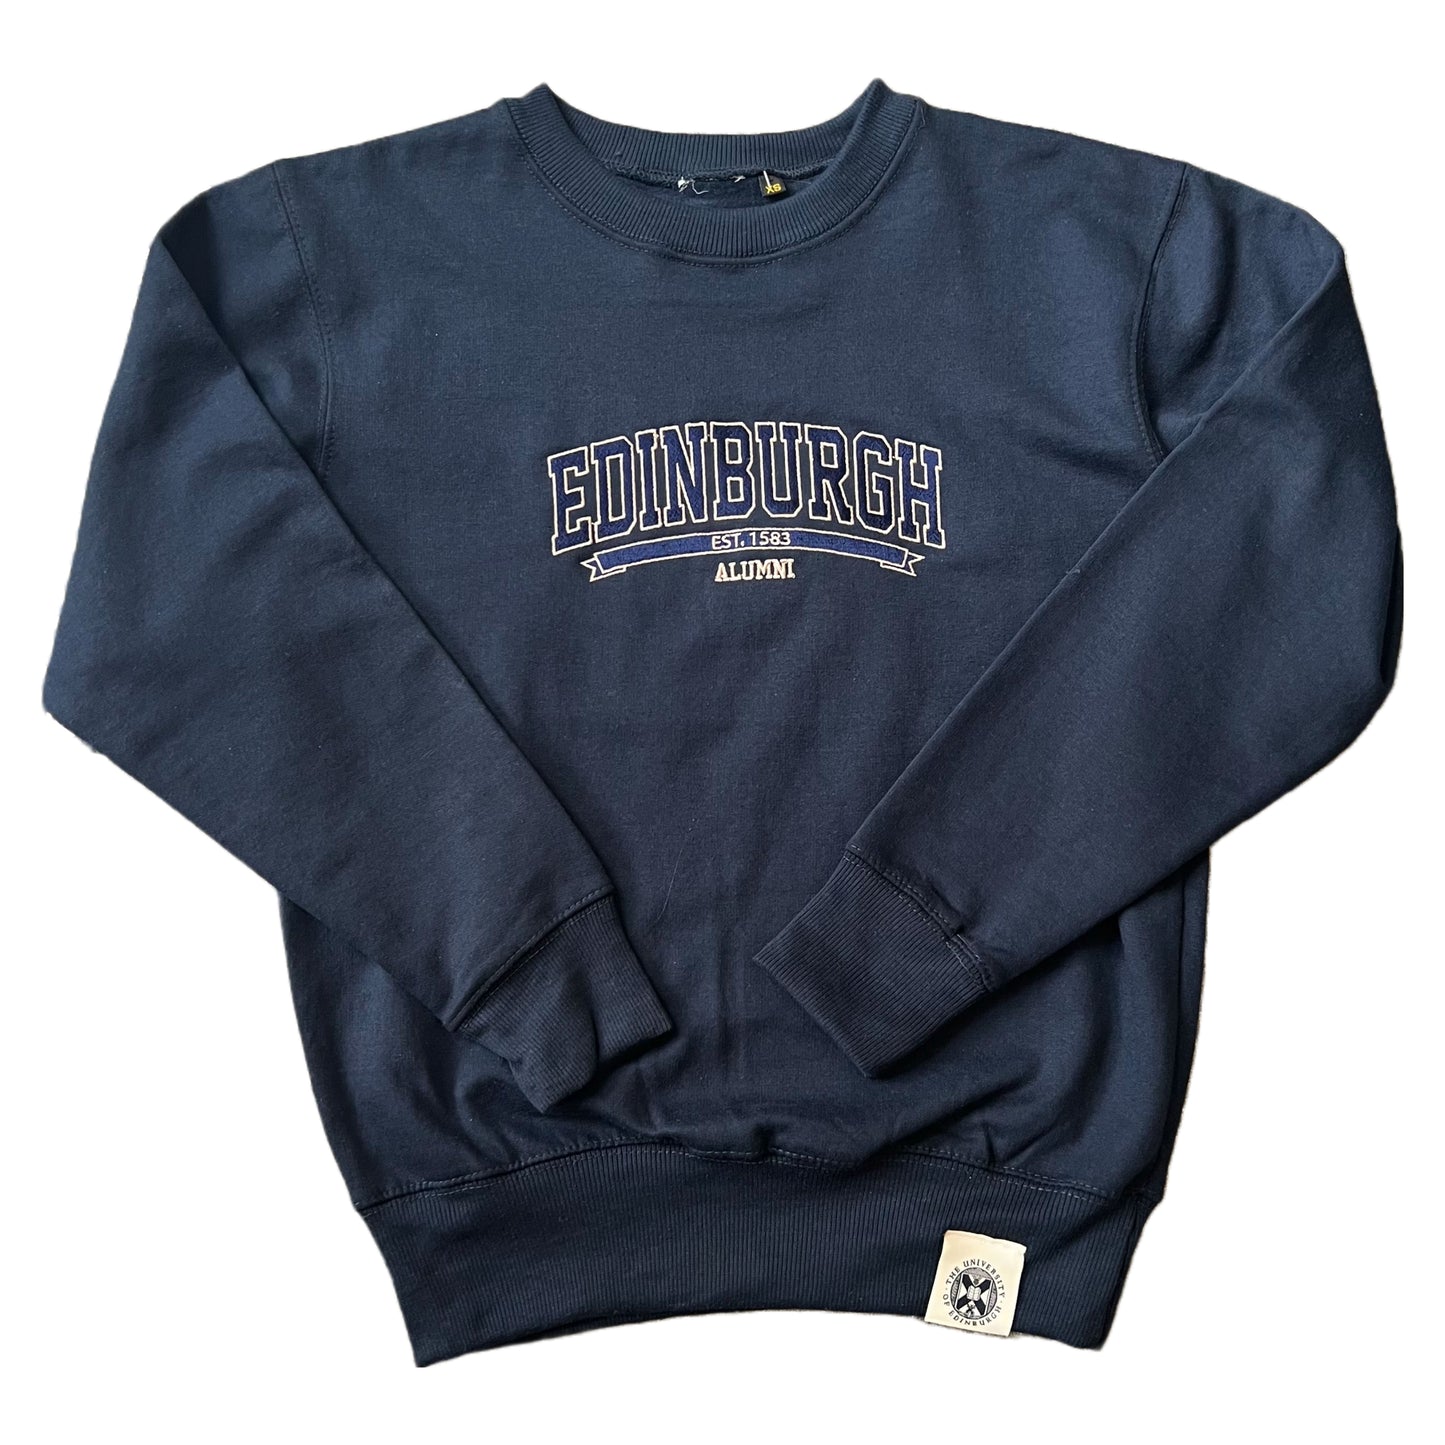 Navy sweatshirt with 'EDINBURGH ALUMNI' stitched on the front in blue and white text